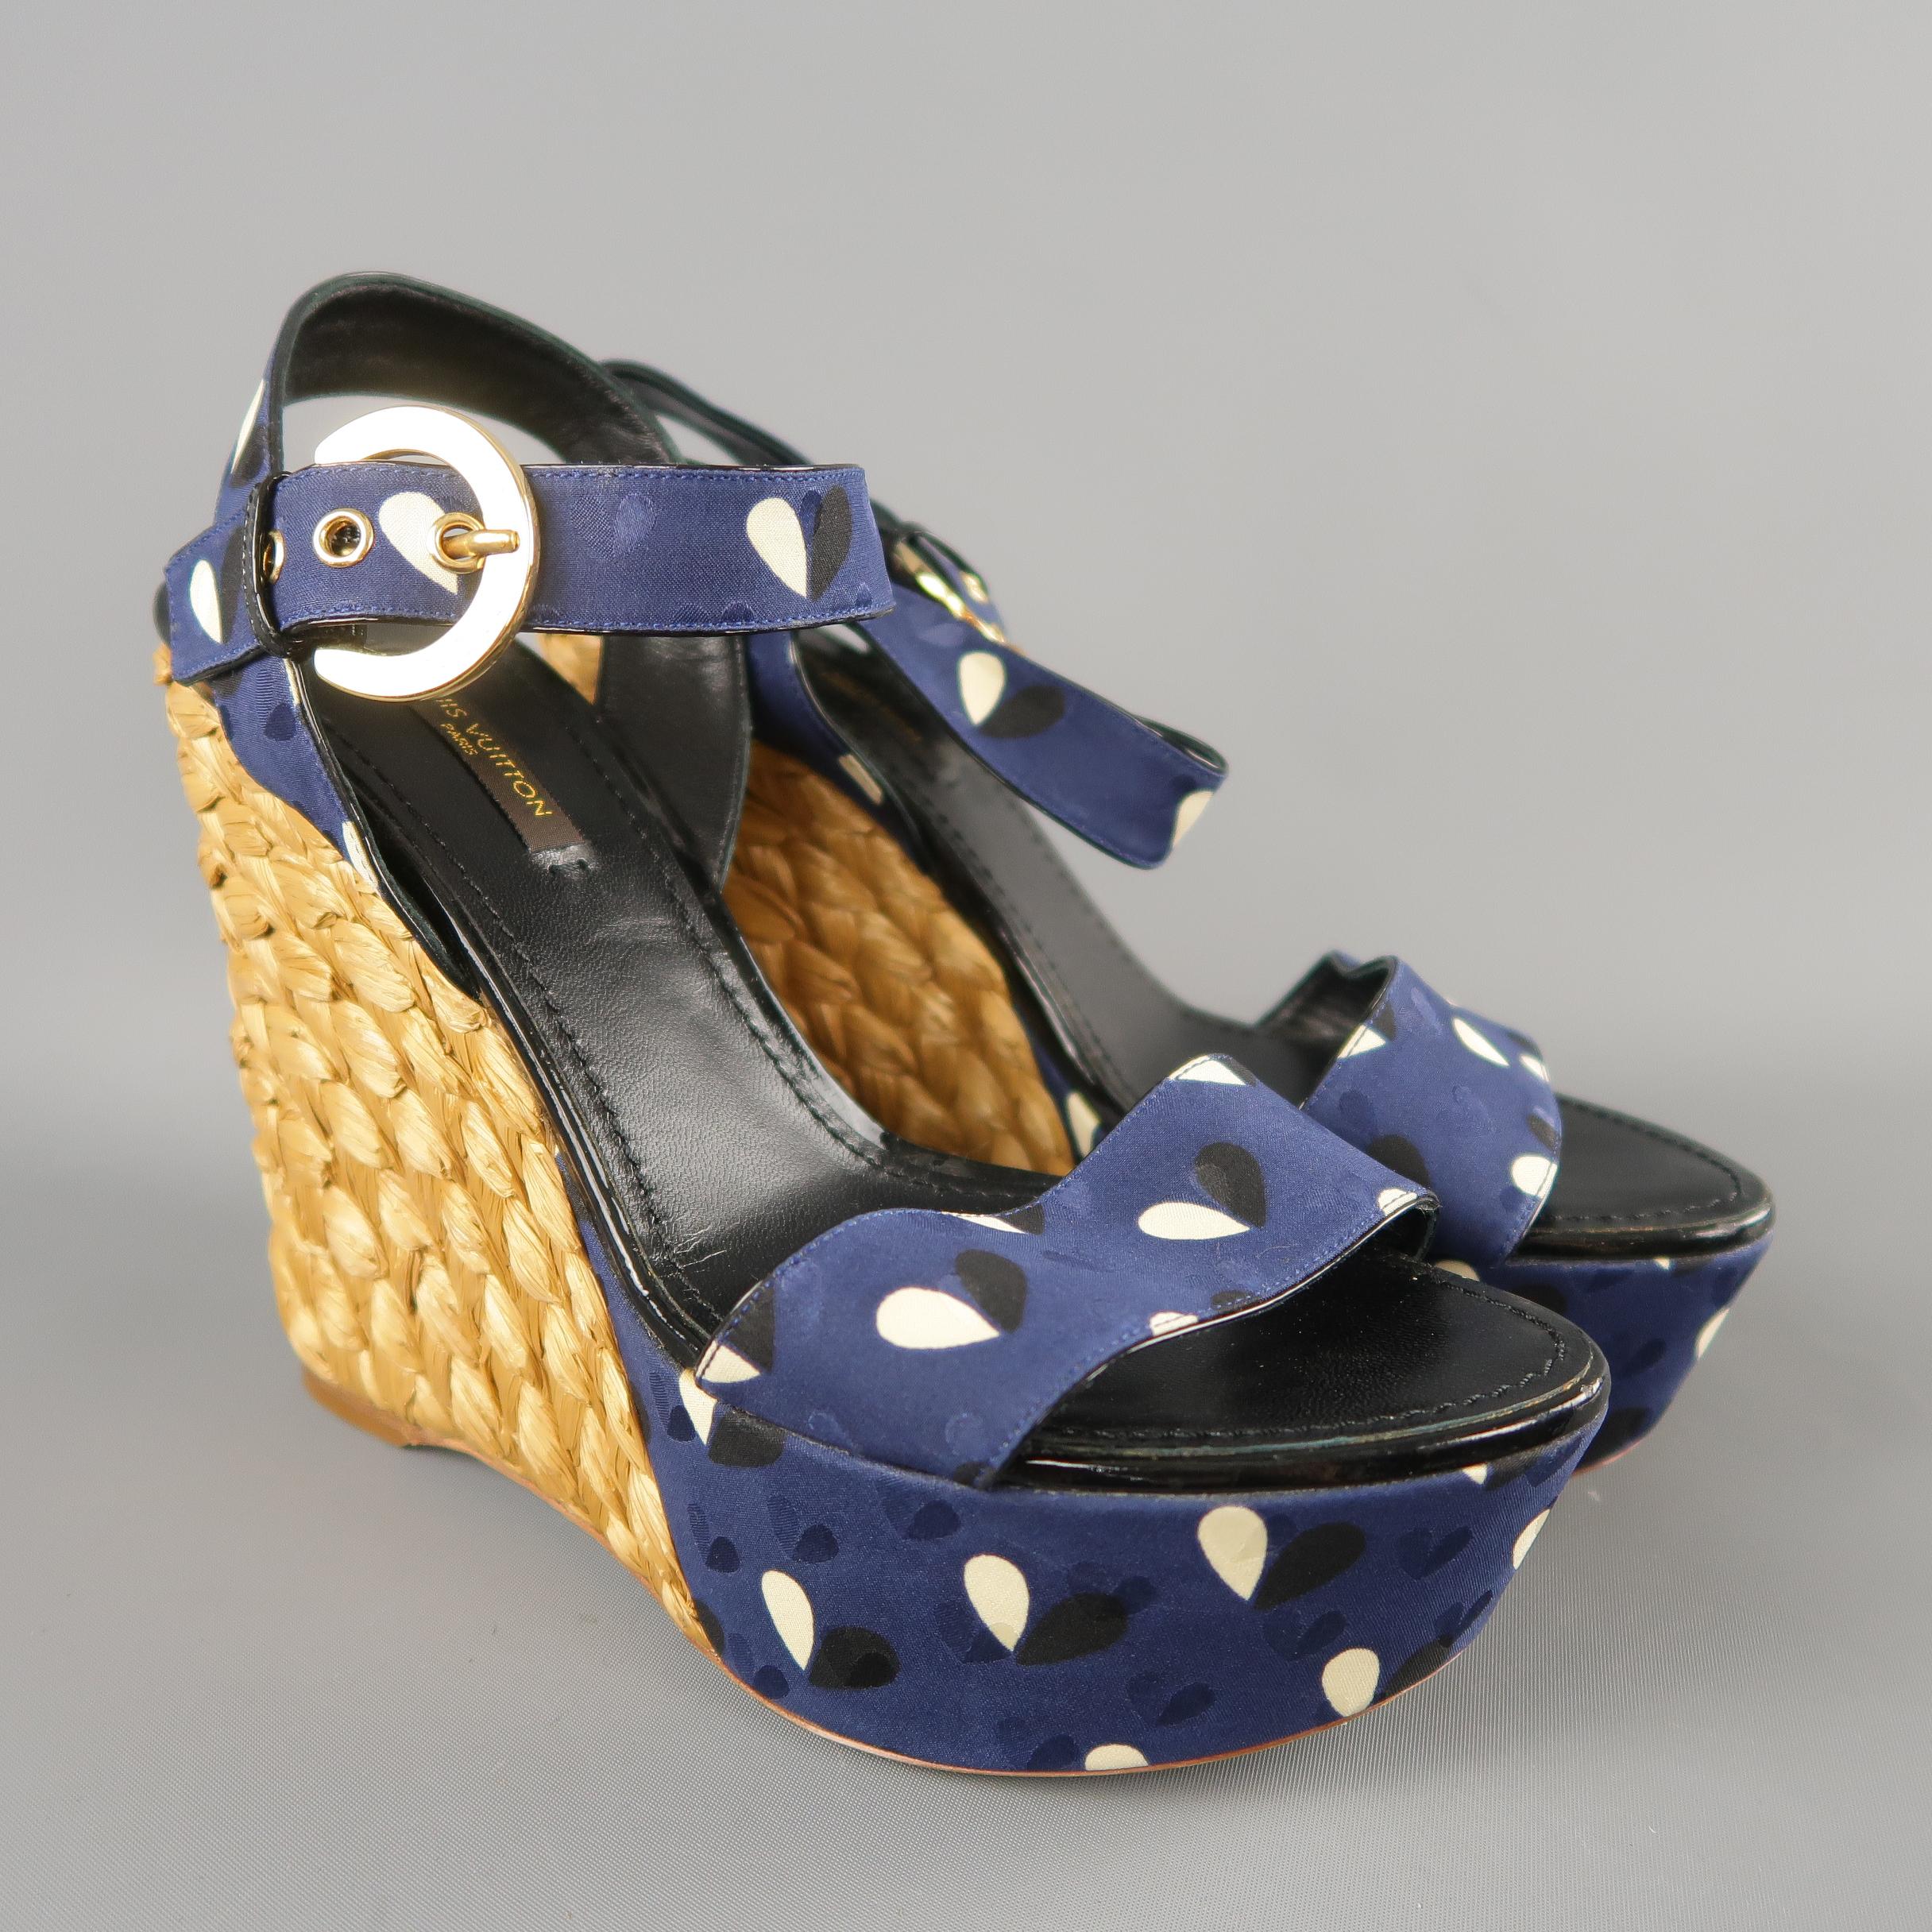 LOUIS VUITTON sandals come in navy printed satin with thick straps, ankle harness with gold tone engraved buckle, and thick braided platform wedge heel. Made in Italy.
 
New without Tags.
Marked: IT 37
 
Heel: 5 in.
Platform: 1.5 in.